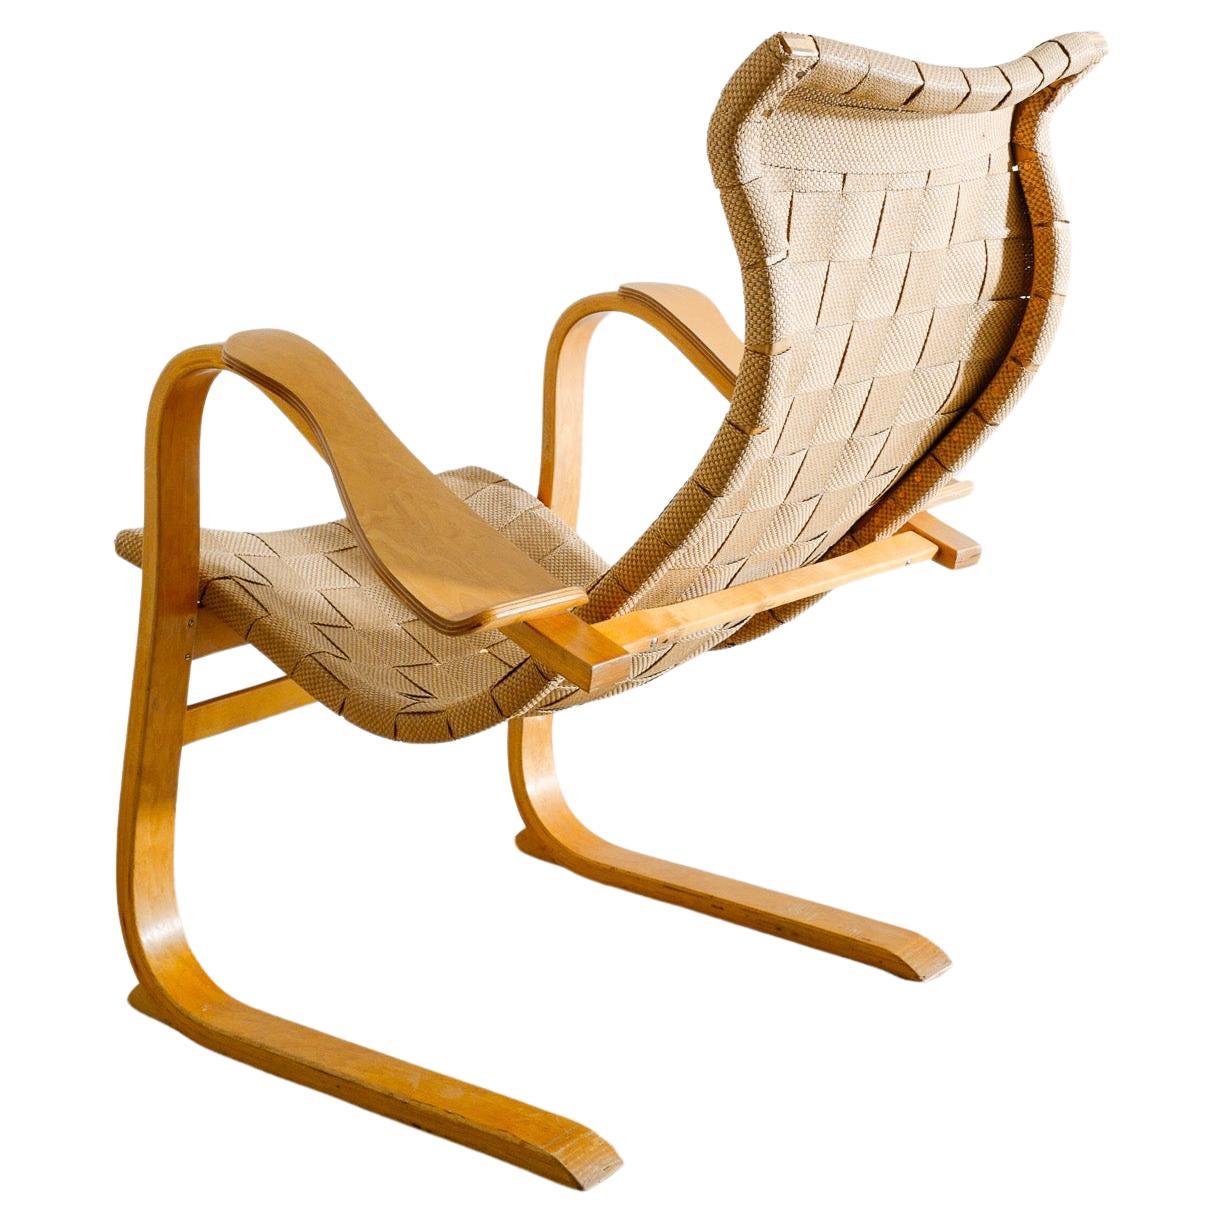 G. A Berg Mid Century "Patron" Armchair in Birch Wood Produced in Sweden, 1940s For Sale